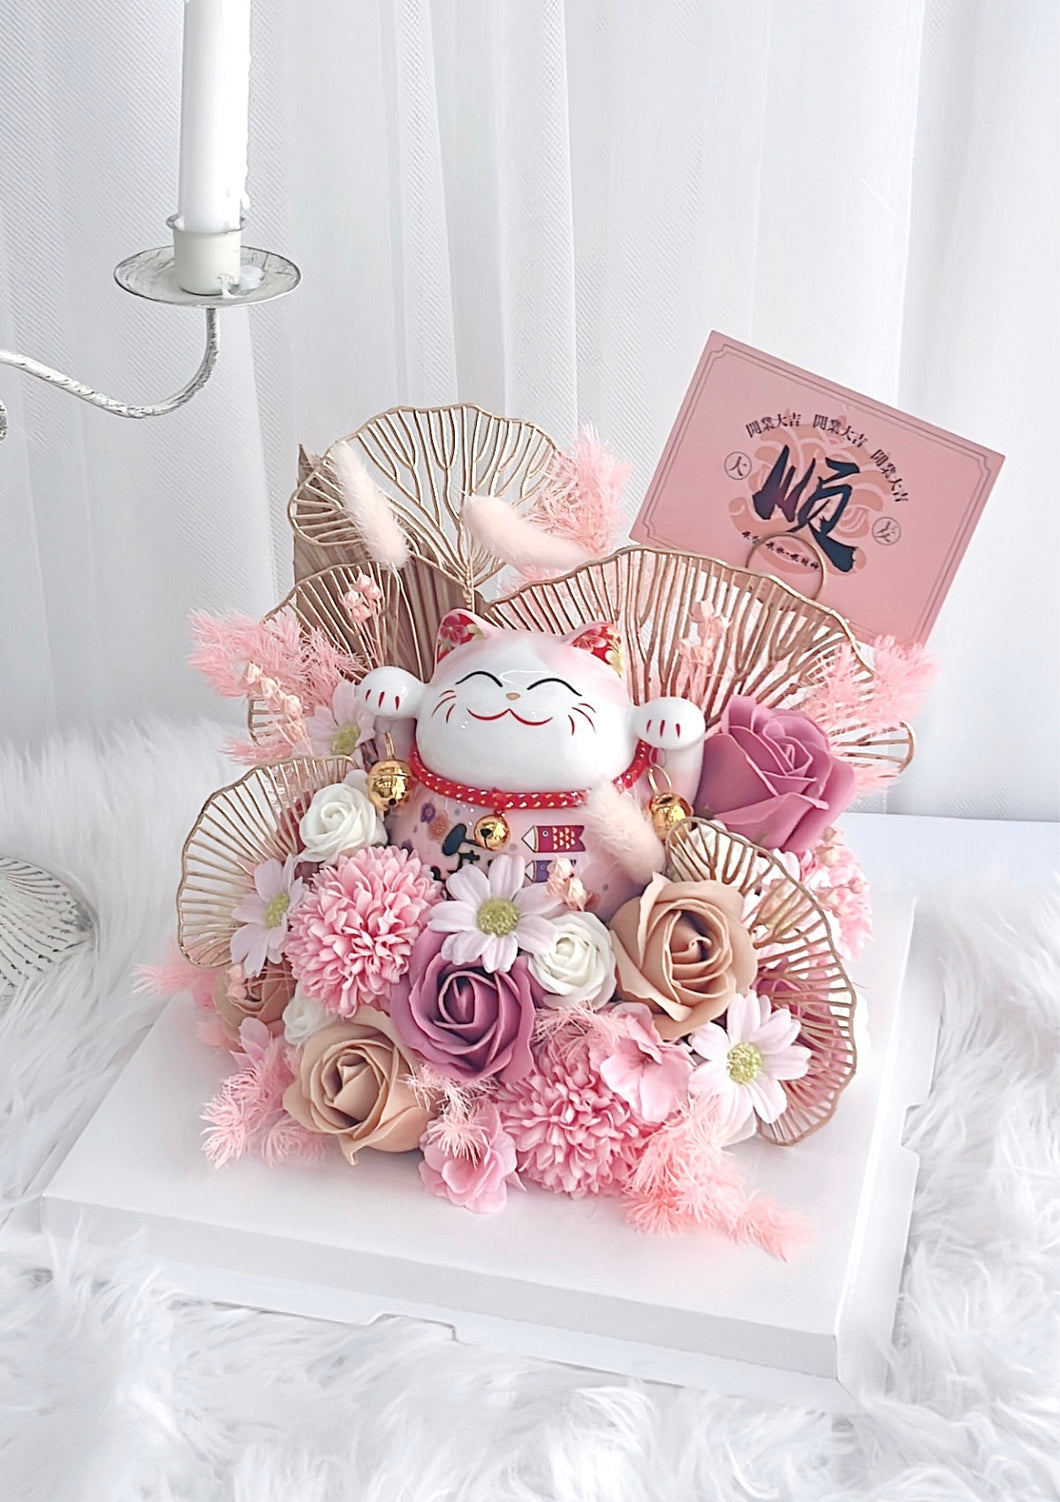 Pink Fortune Cat with Red Soap Flower Box 招财猫粉色系蛋糕礼盒